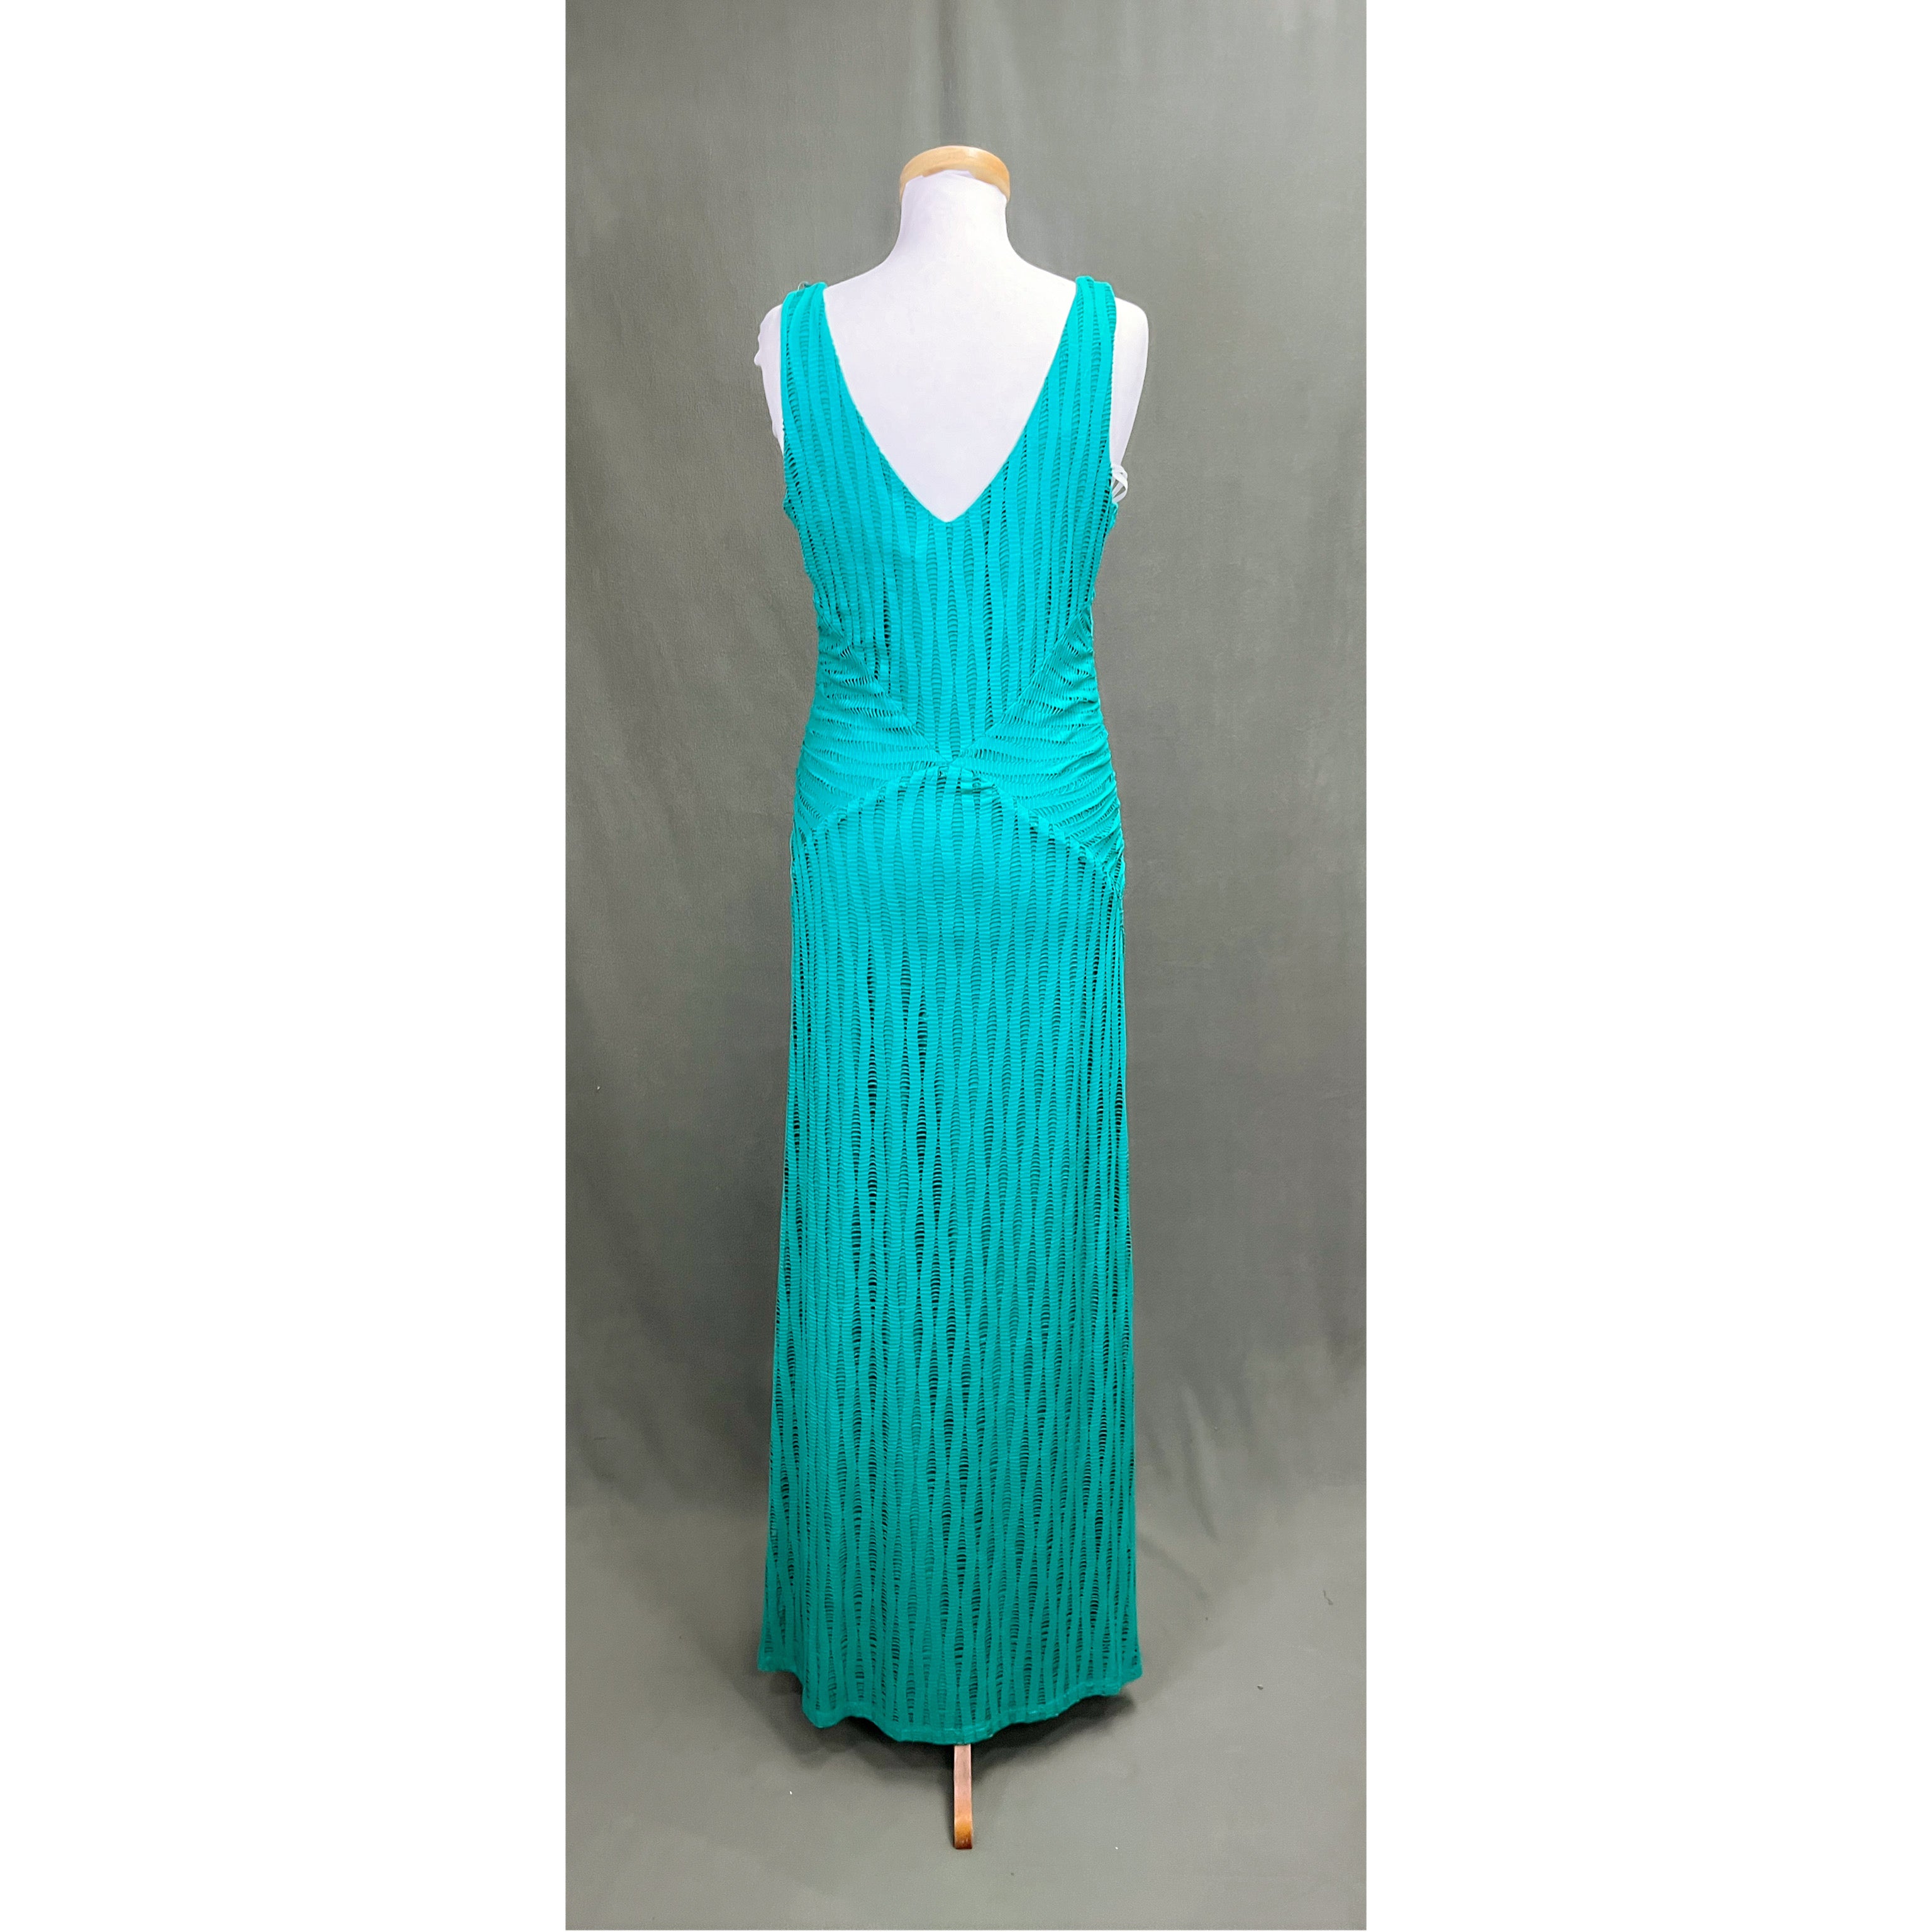 Frank Lyman turquoise dress, size 10, NEW WITH TAGS!